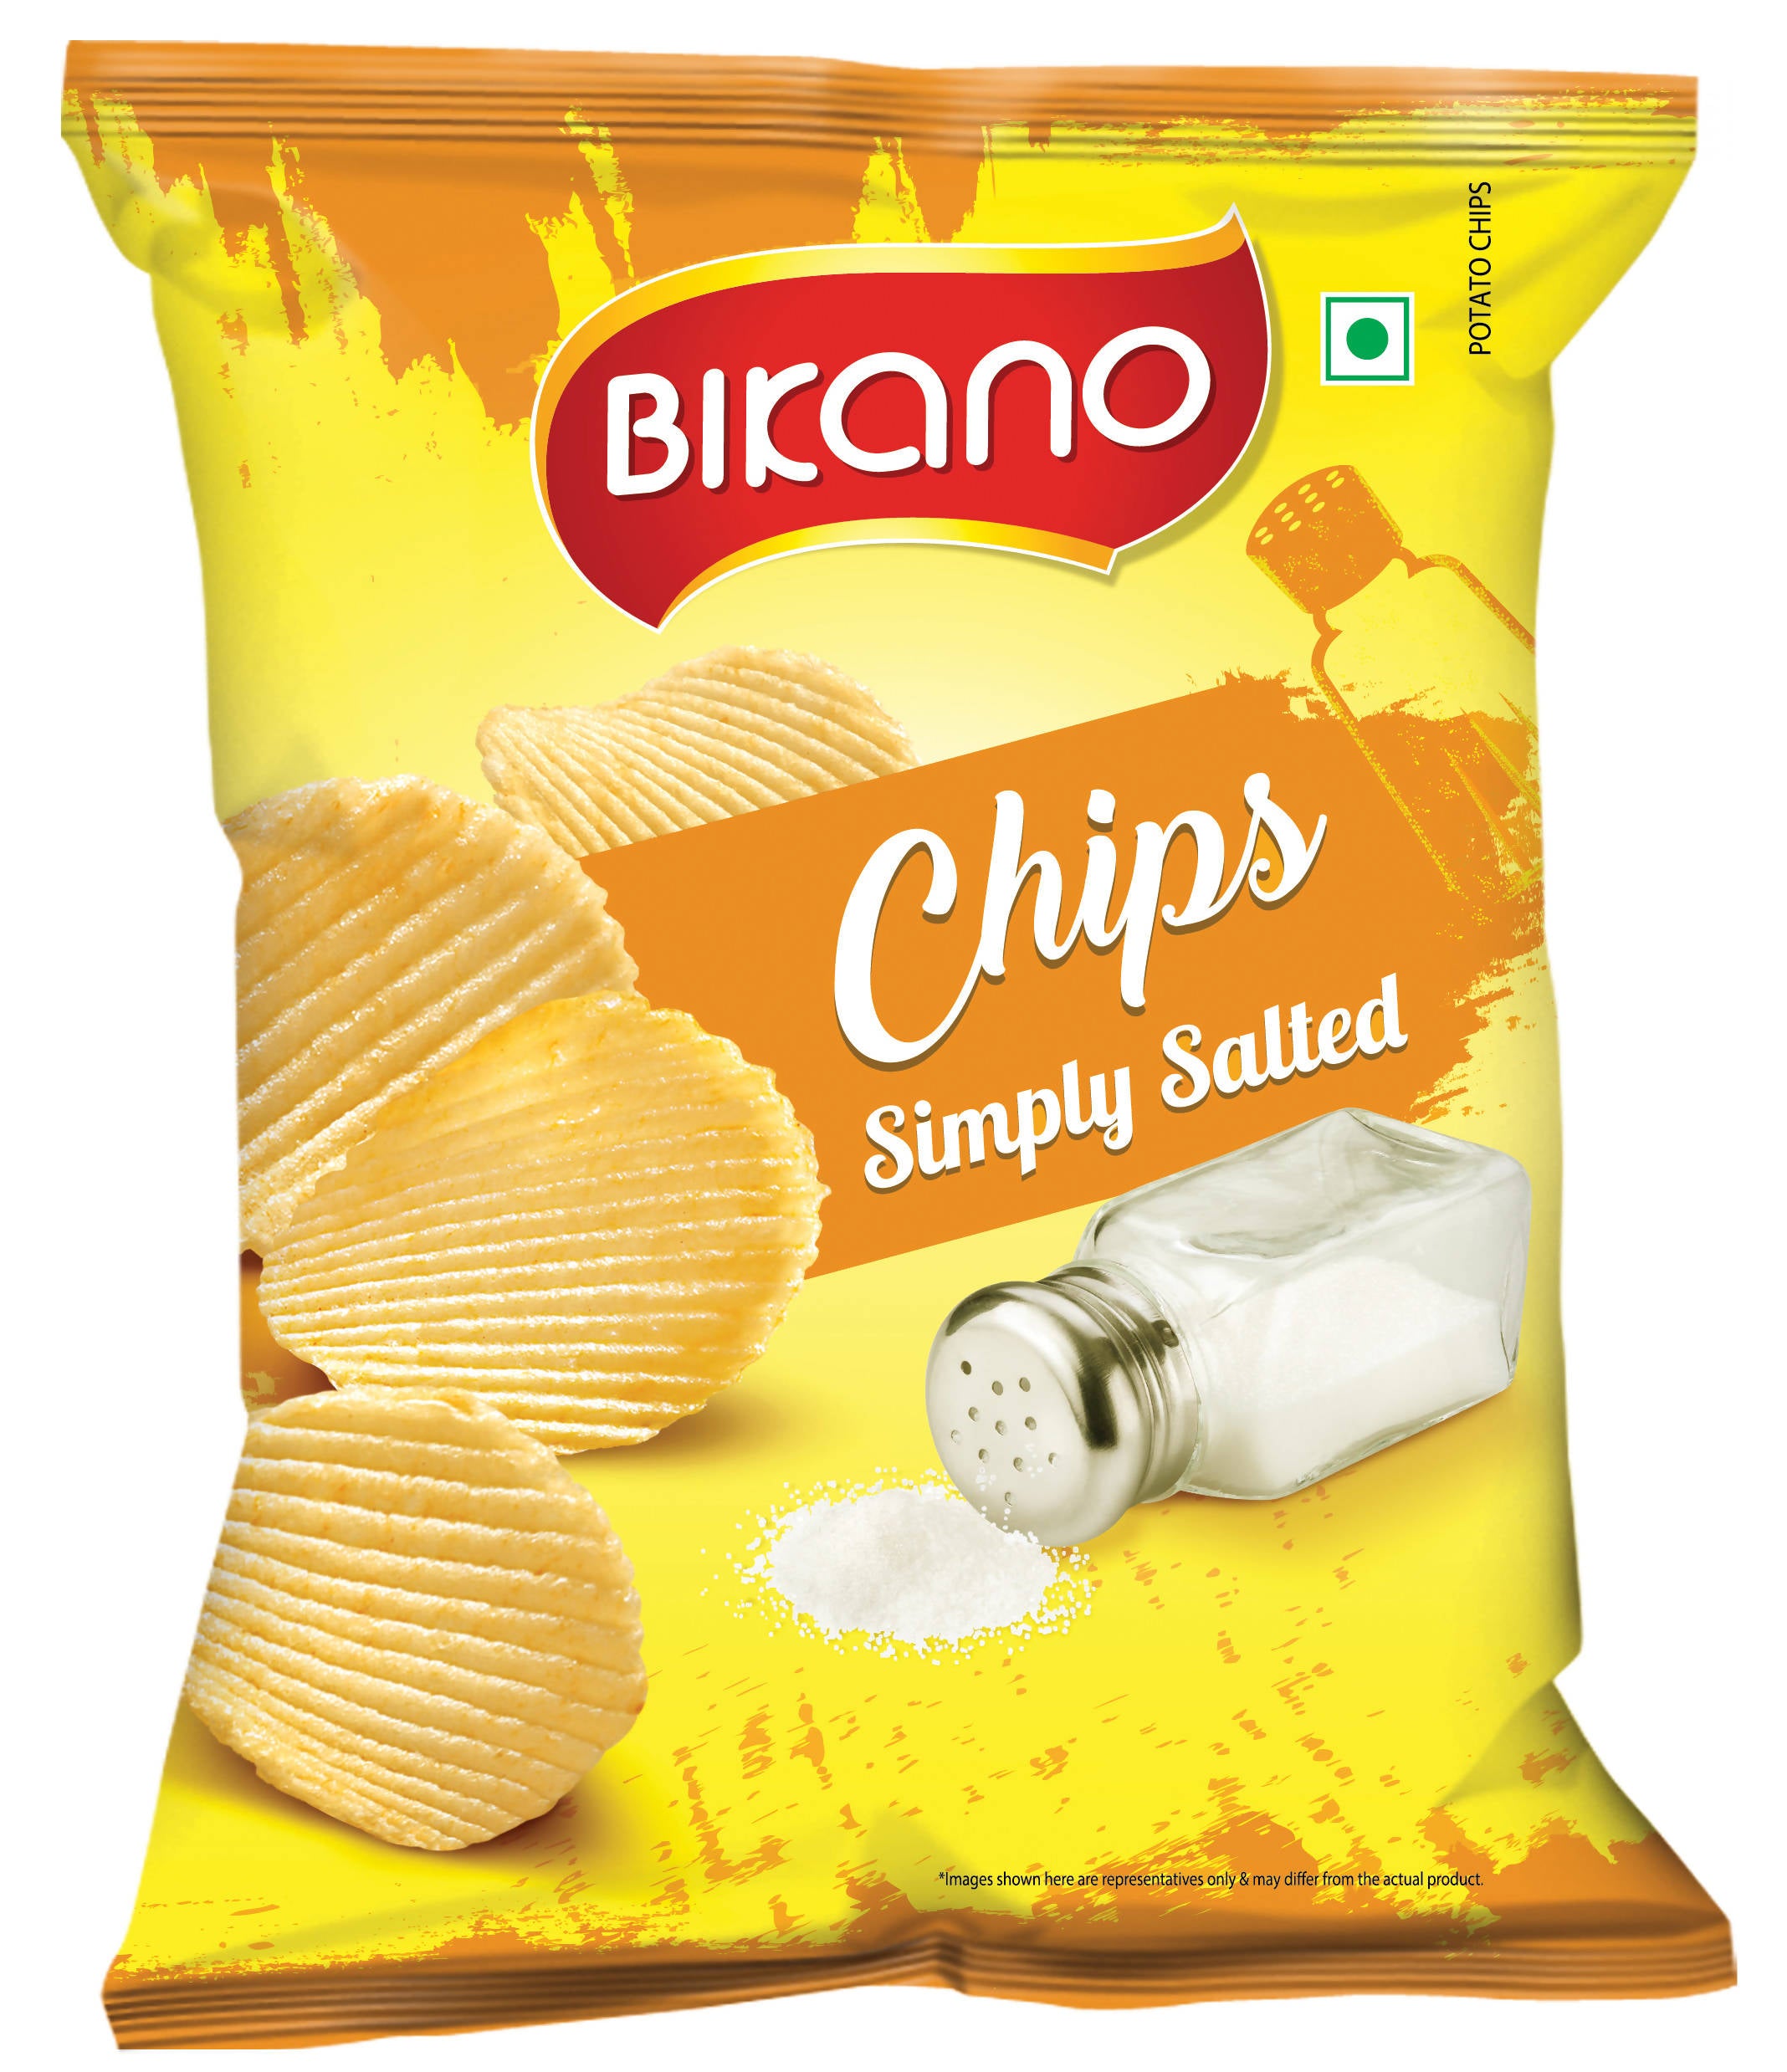 Bikano Chips - Simply Salted